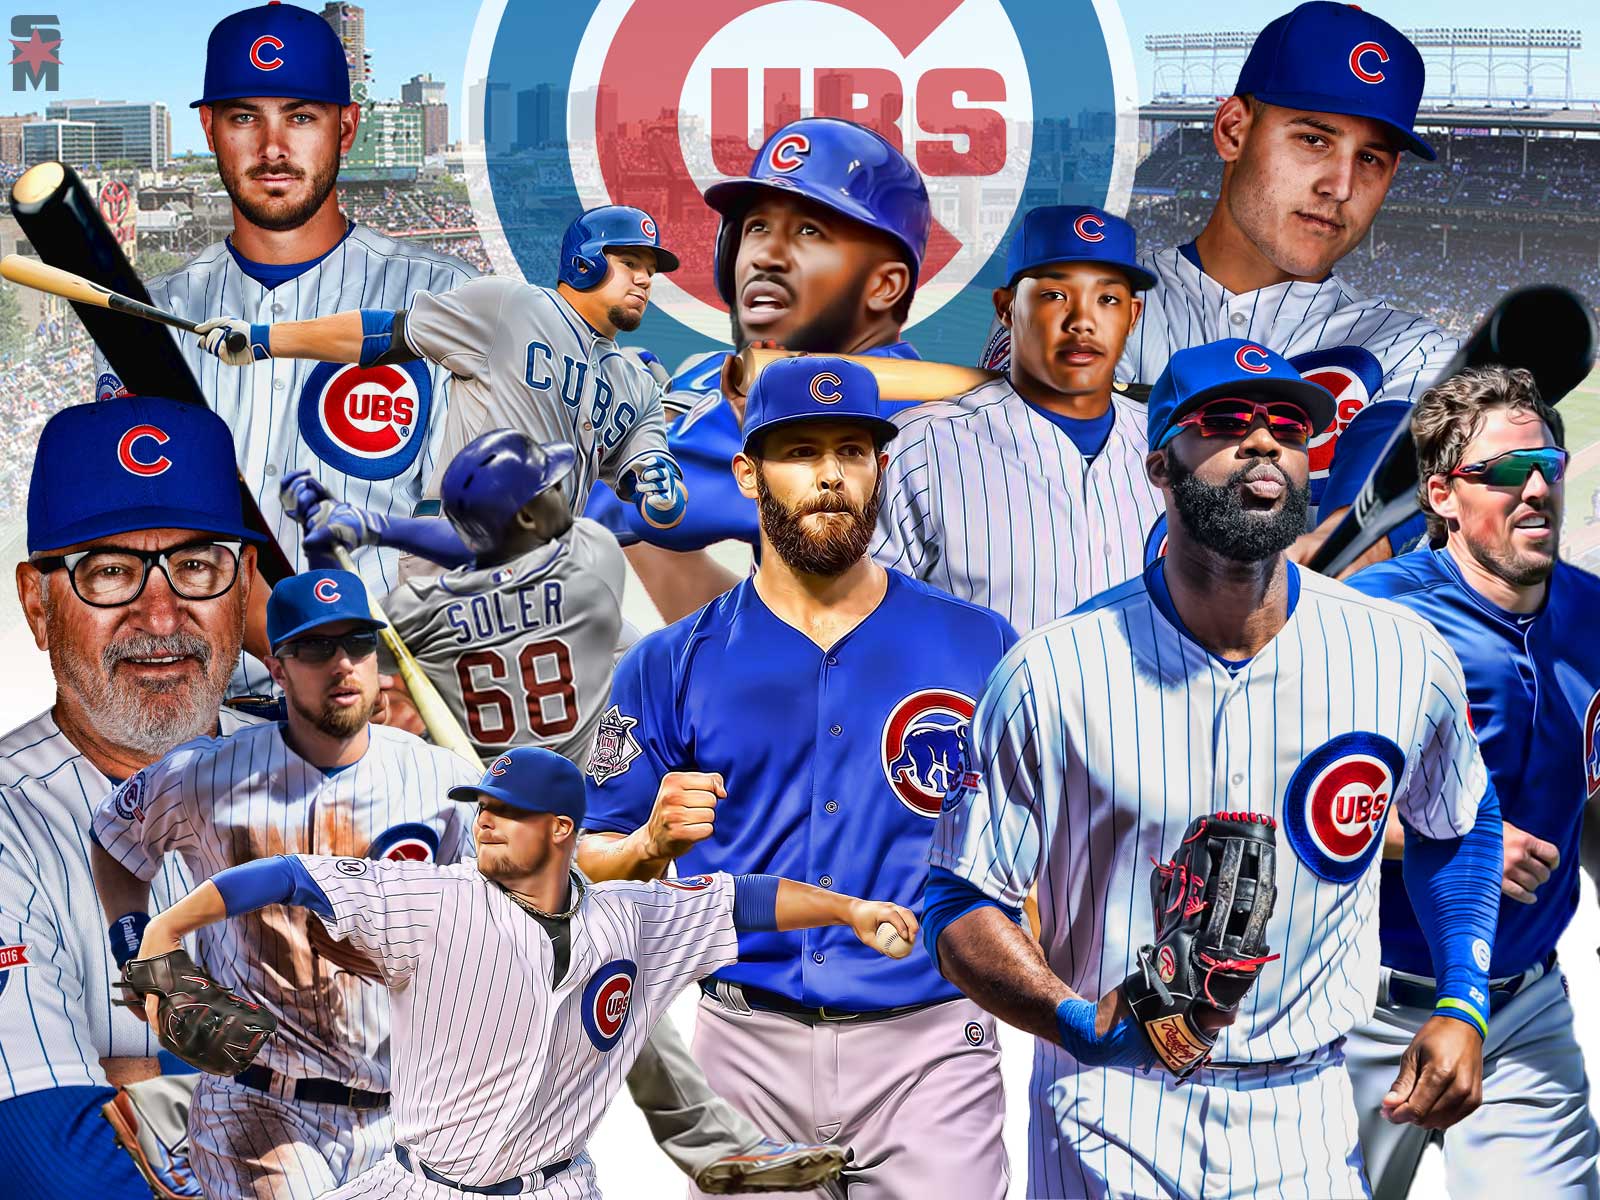 These 2016 Cubs are one of the best teams in the divisional era